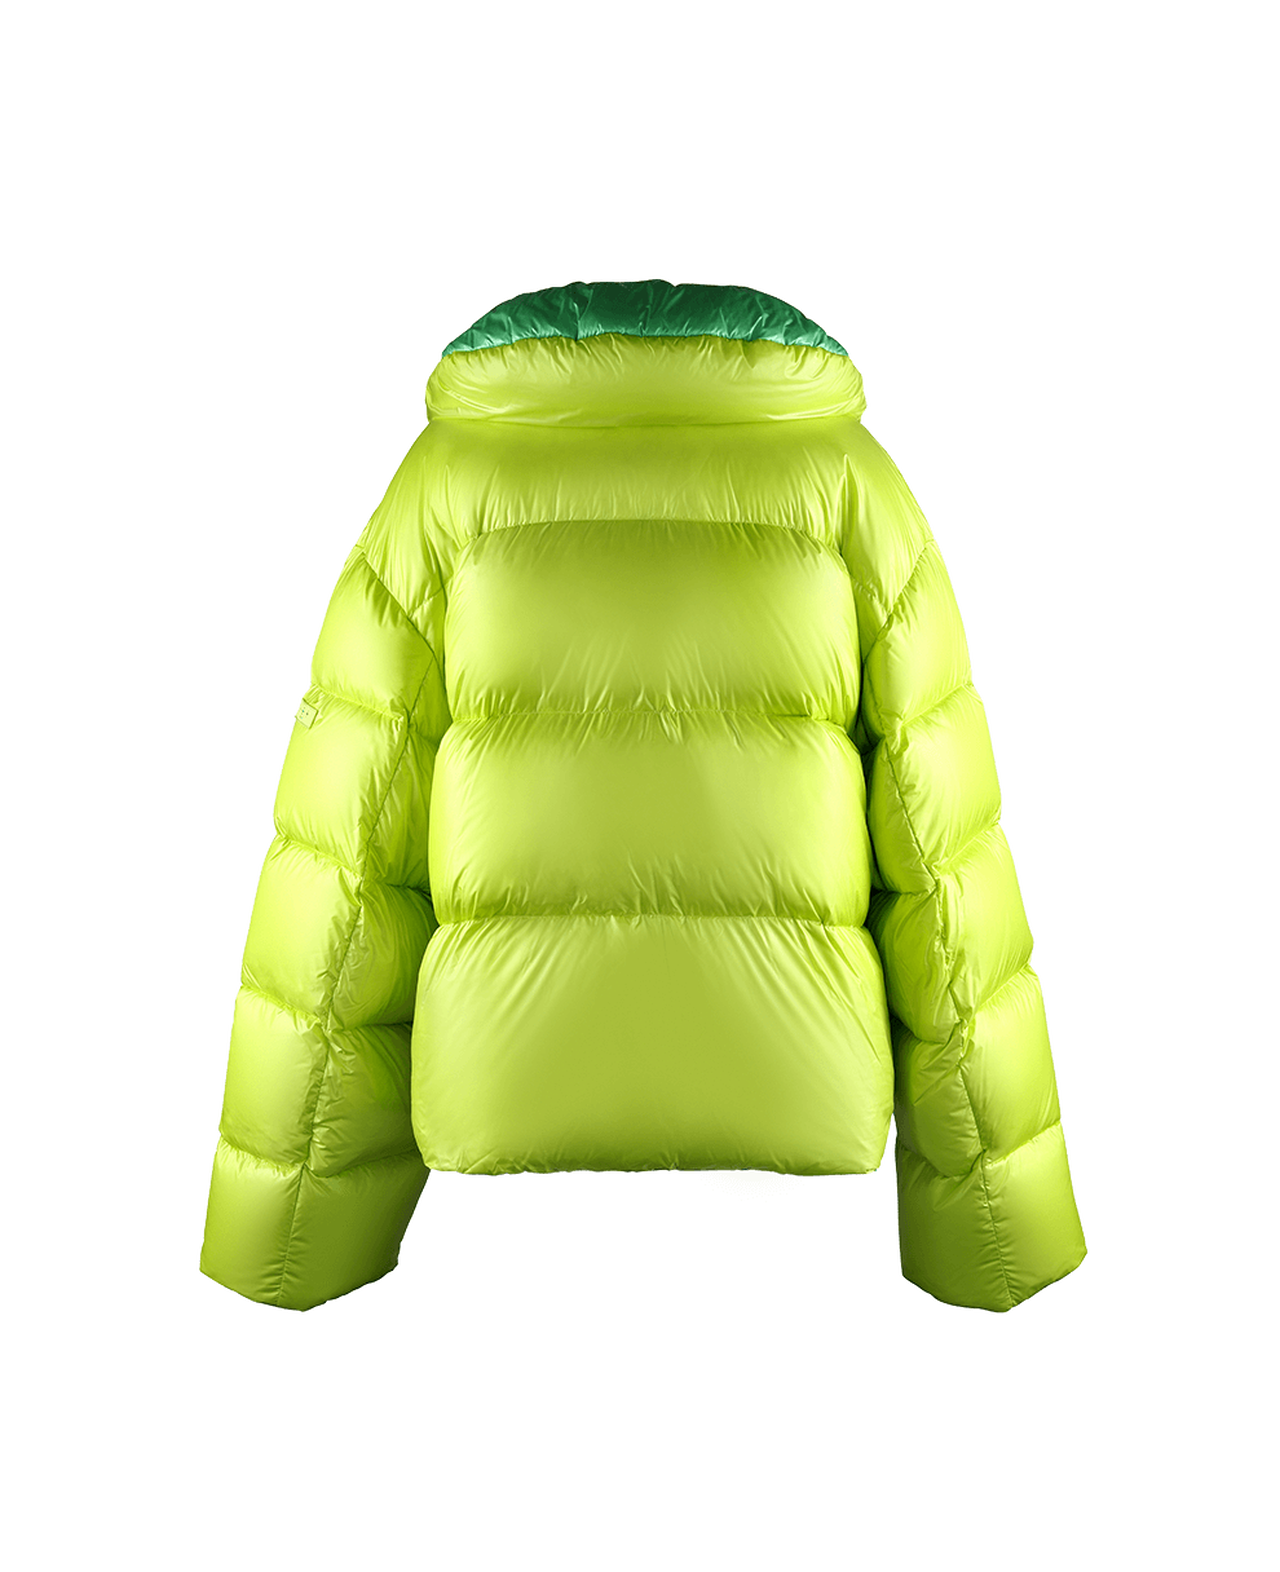 TATRAS × ZOE COSTELLO LIZZO MEN'S DOWN JACKET,LIME, large image number 2